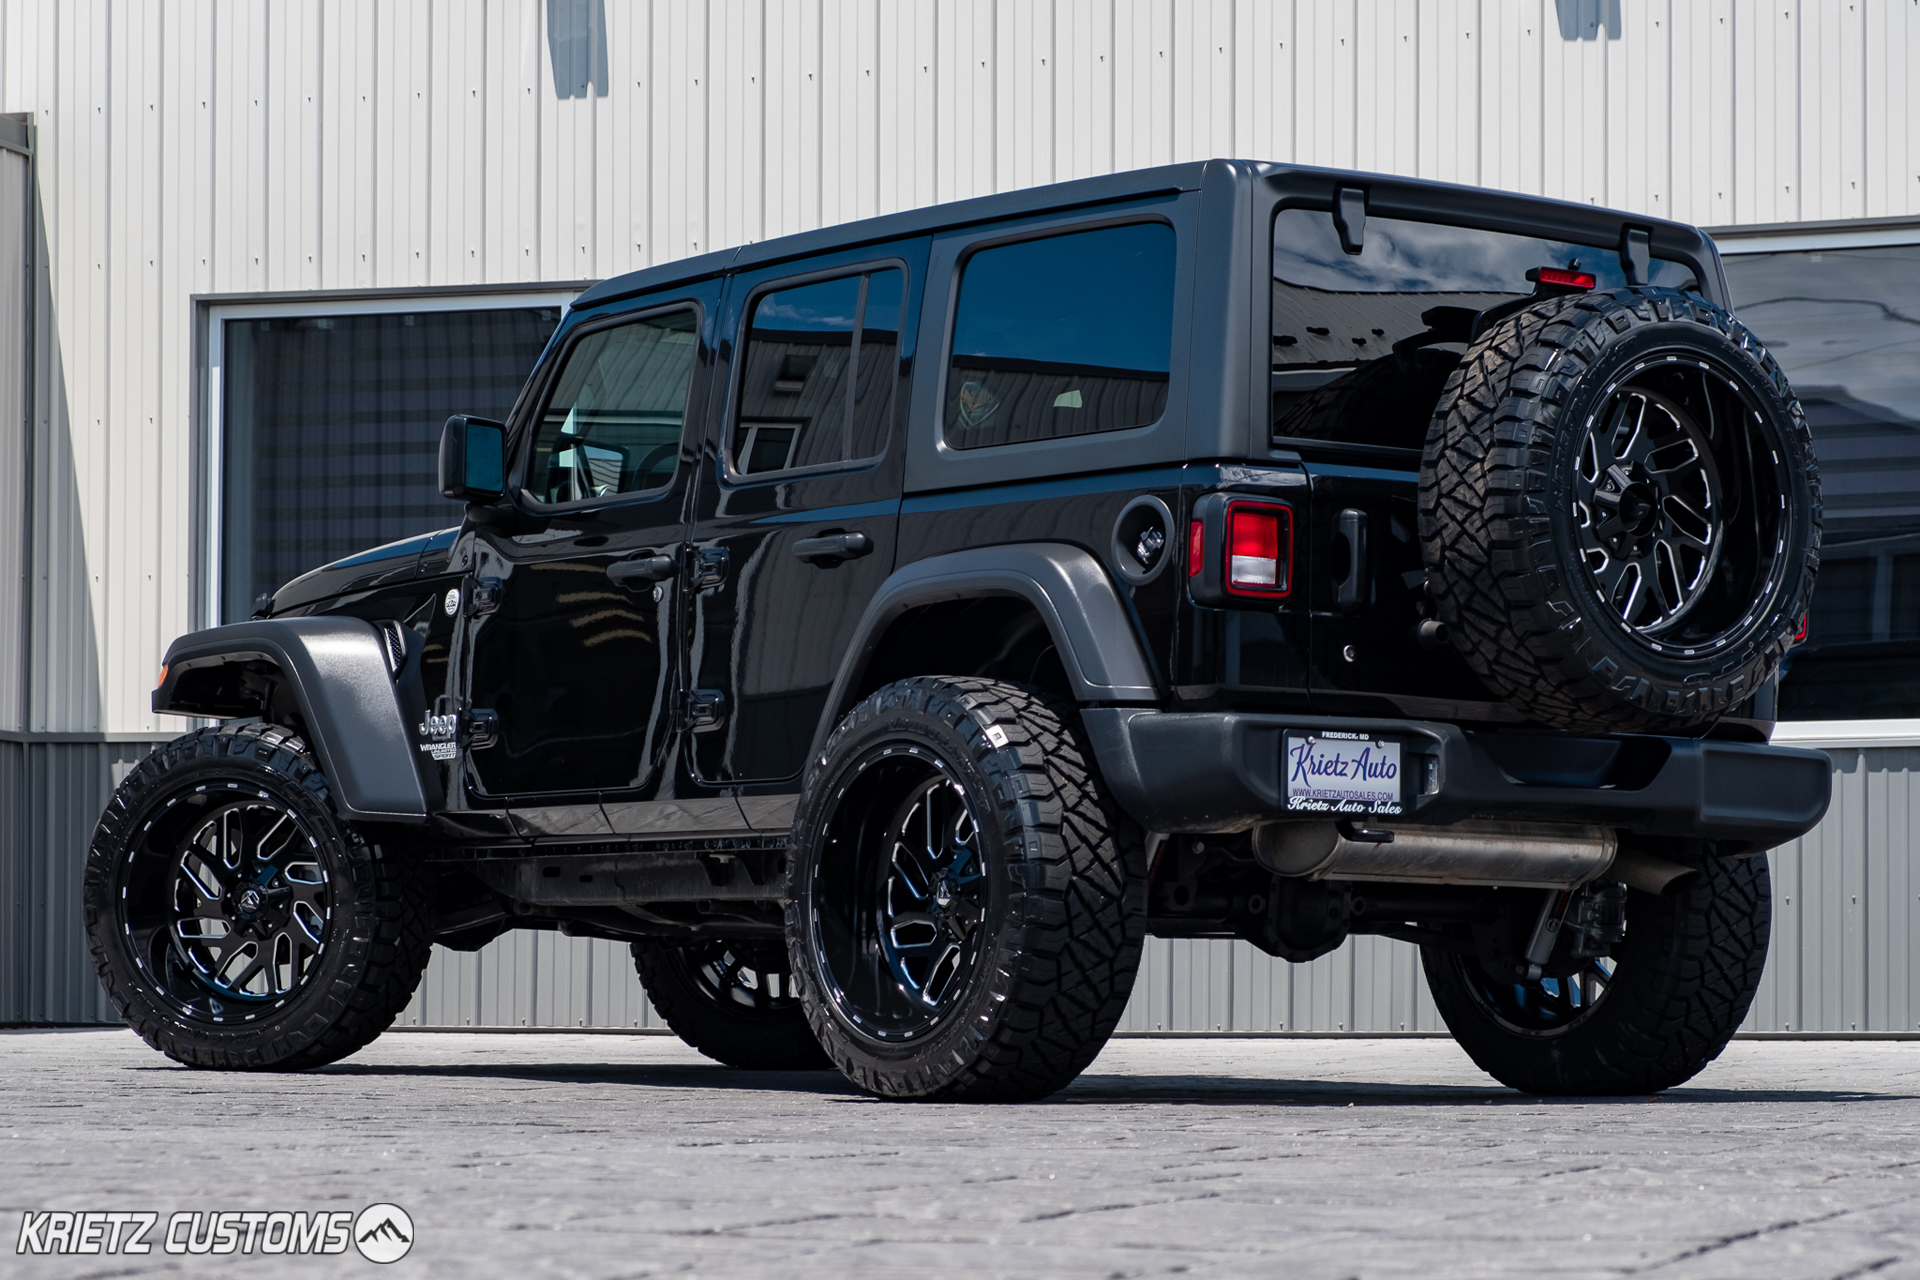 Lifted 2020 Jeep Wrangler with 22×12 Fuel Triton Wheels and 2.5 Inch